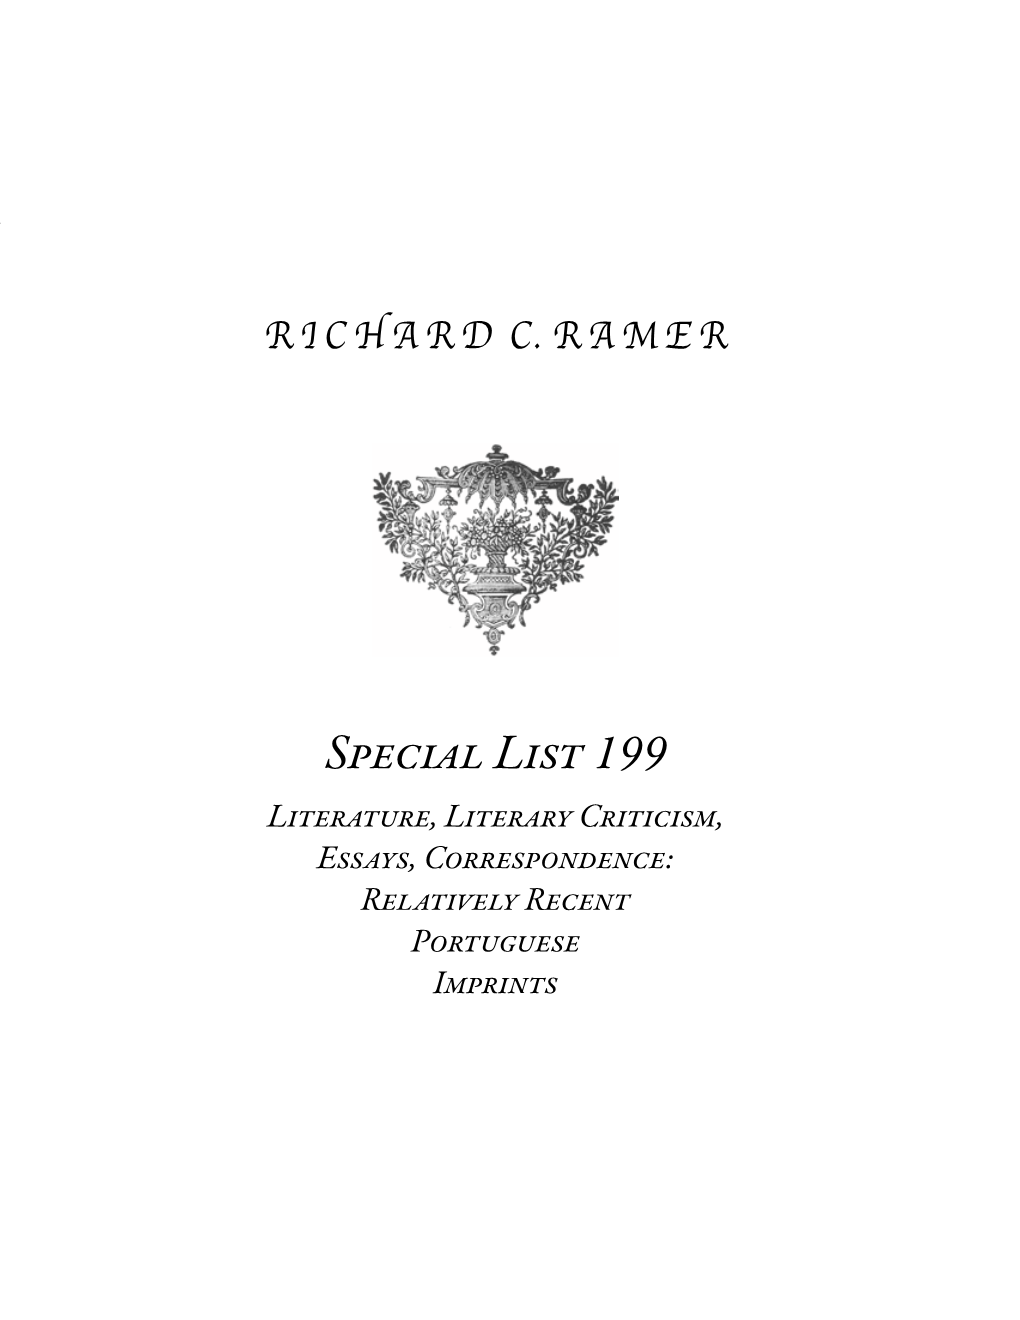 Special List 199 1